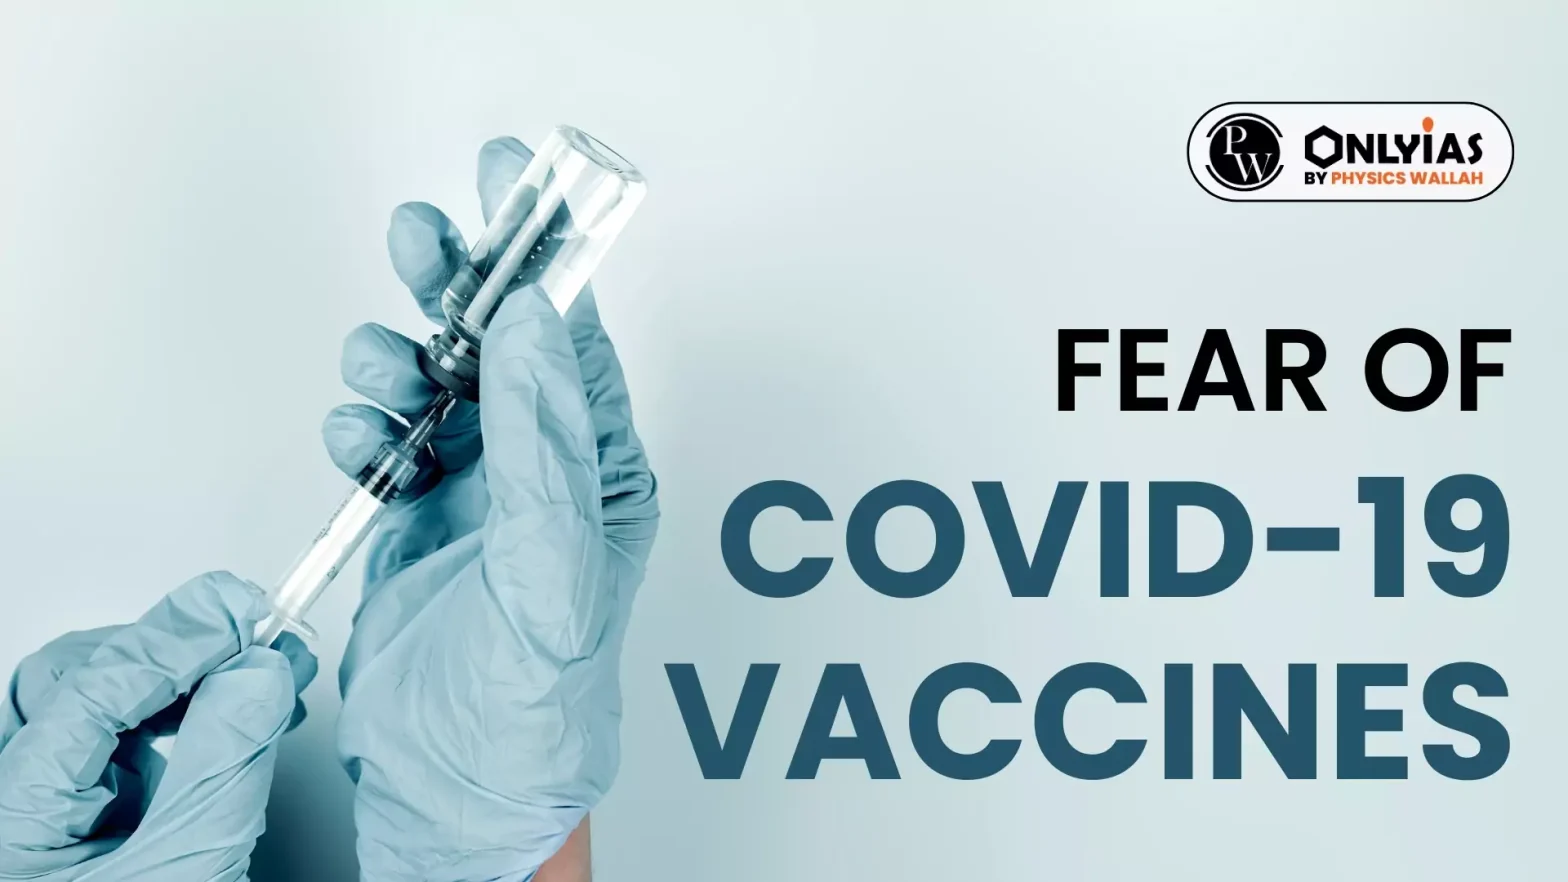 Fear of COVID-19 Vaccines